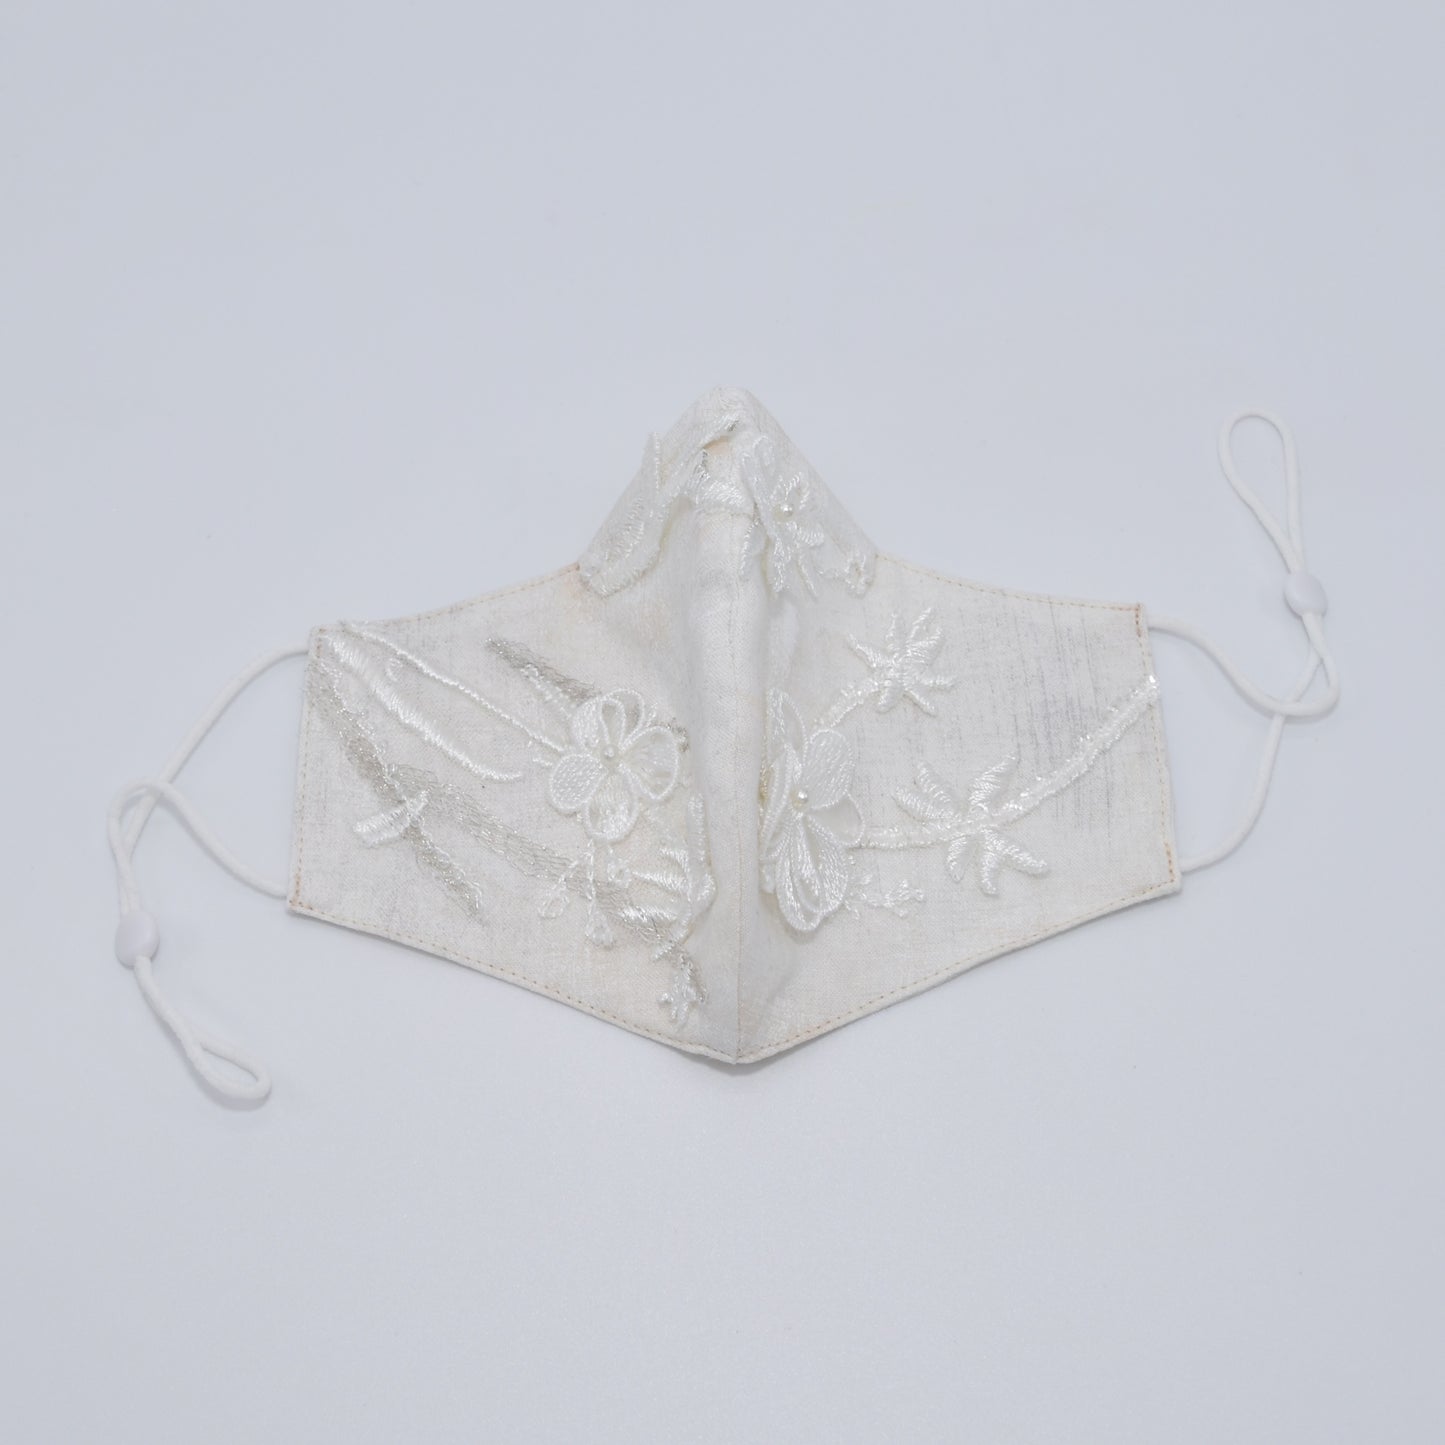 Off-White Bridal Face Mask with Embroidery Appliqué